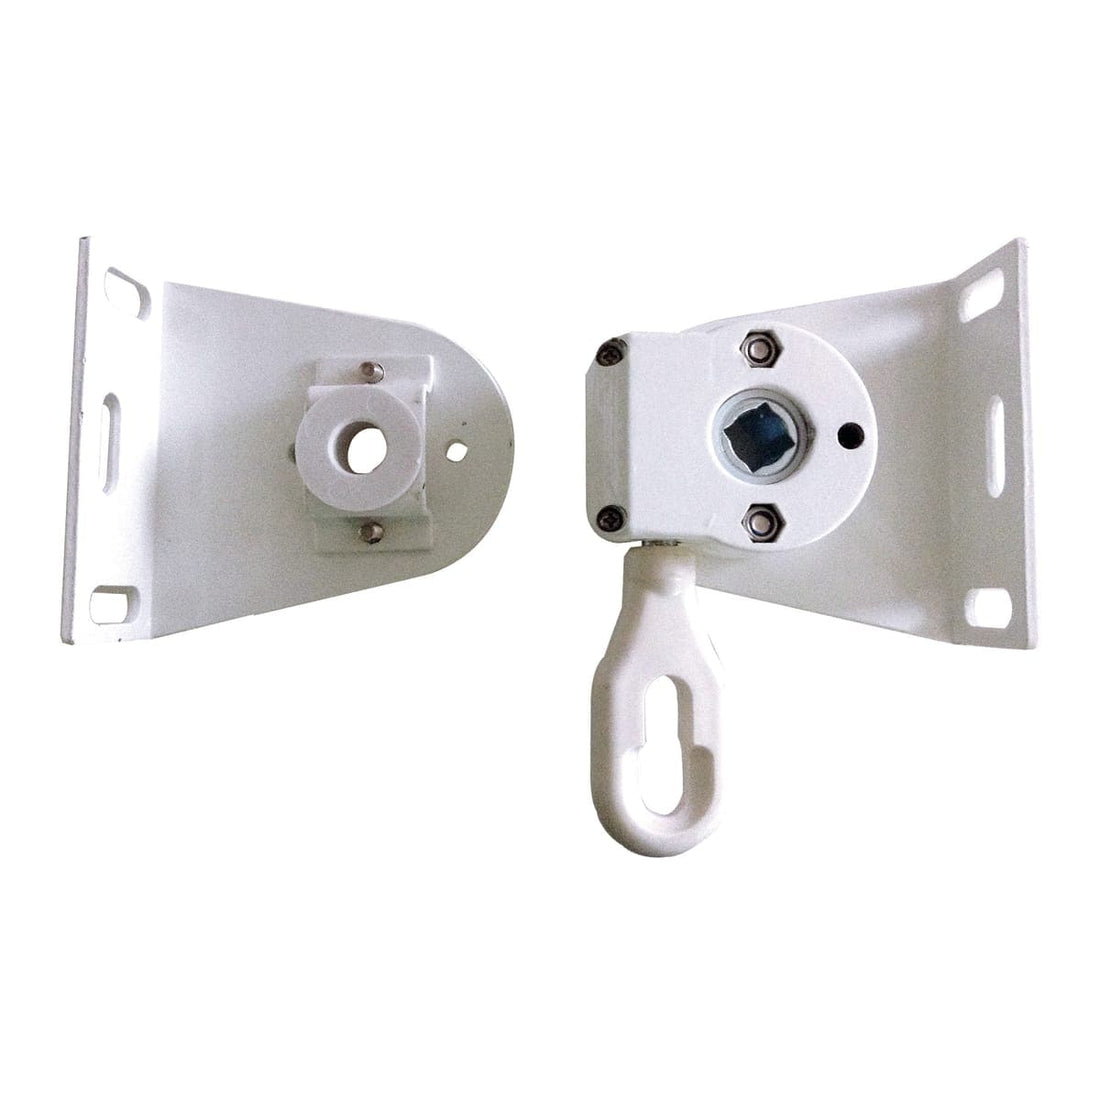 PAIR OF RIGHT/LEFT BRACKETS WITH CURTAIN WINCH - best price from Maltashopper.com BR440001811